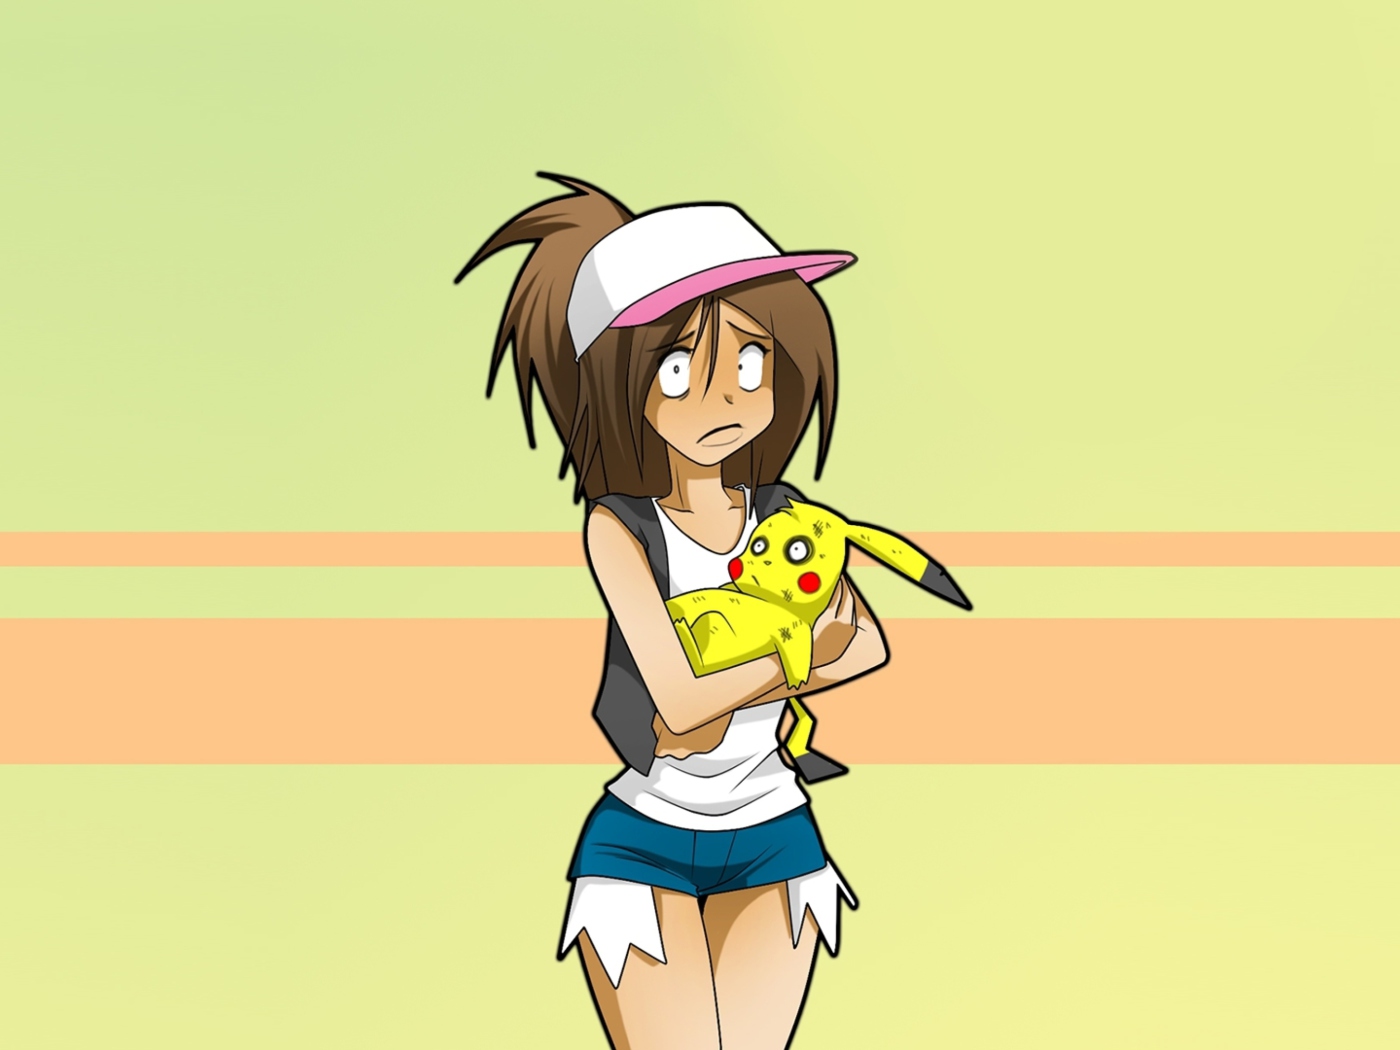 Hipster Girl And Her Pikachu wallpaper 1400x1050